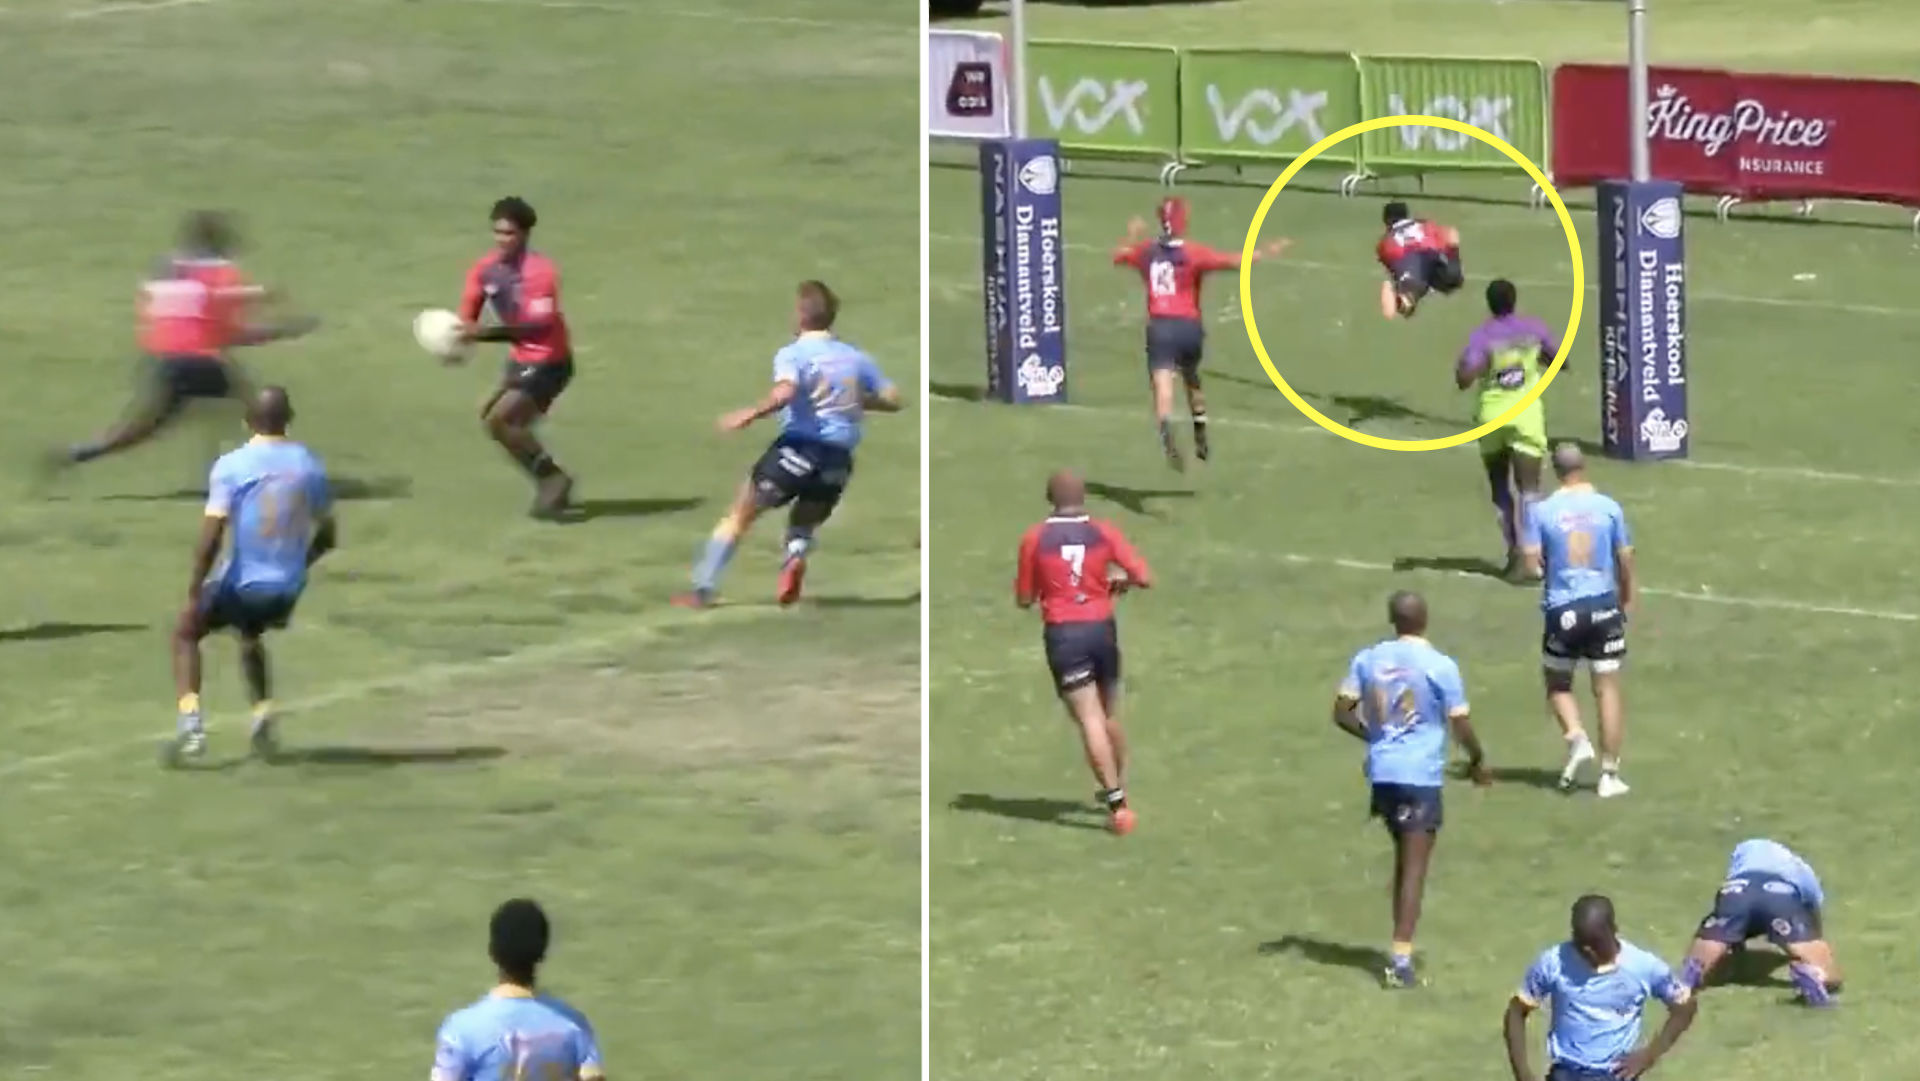 South Africa schools match goes viral with try for the ages